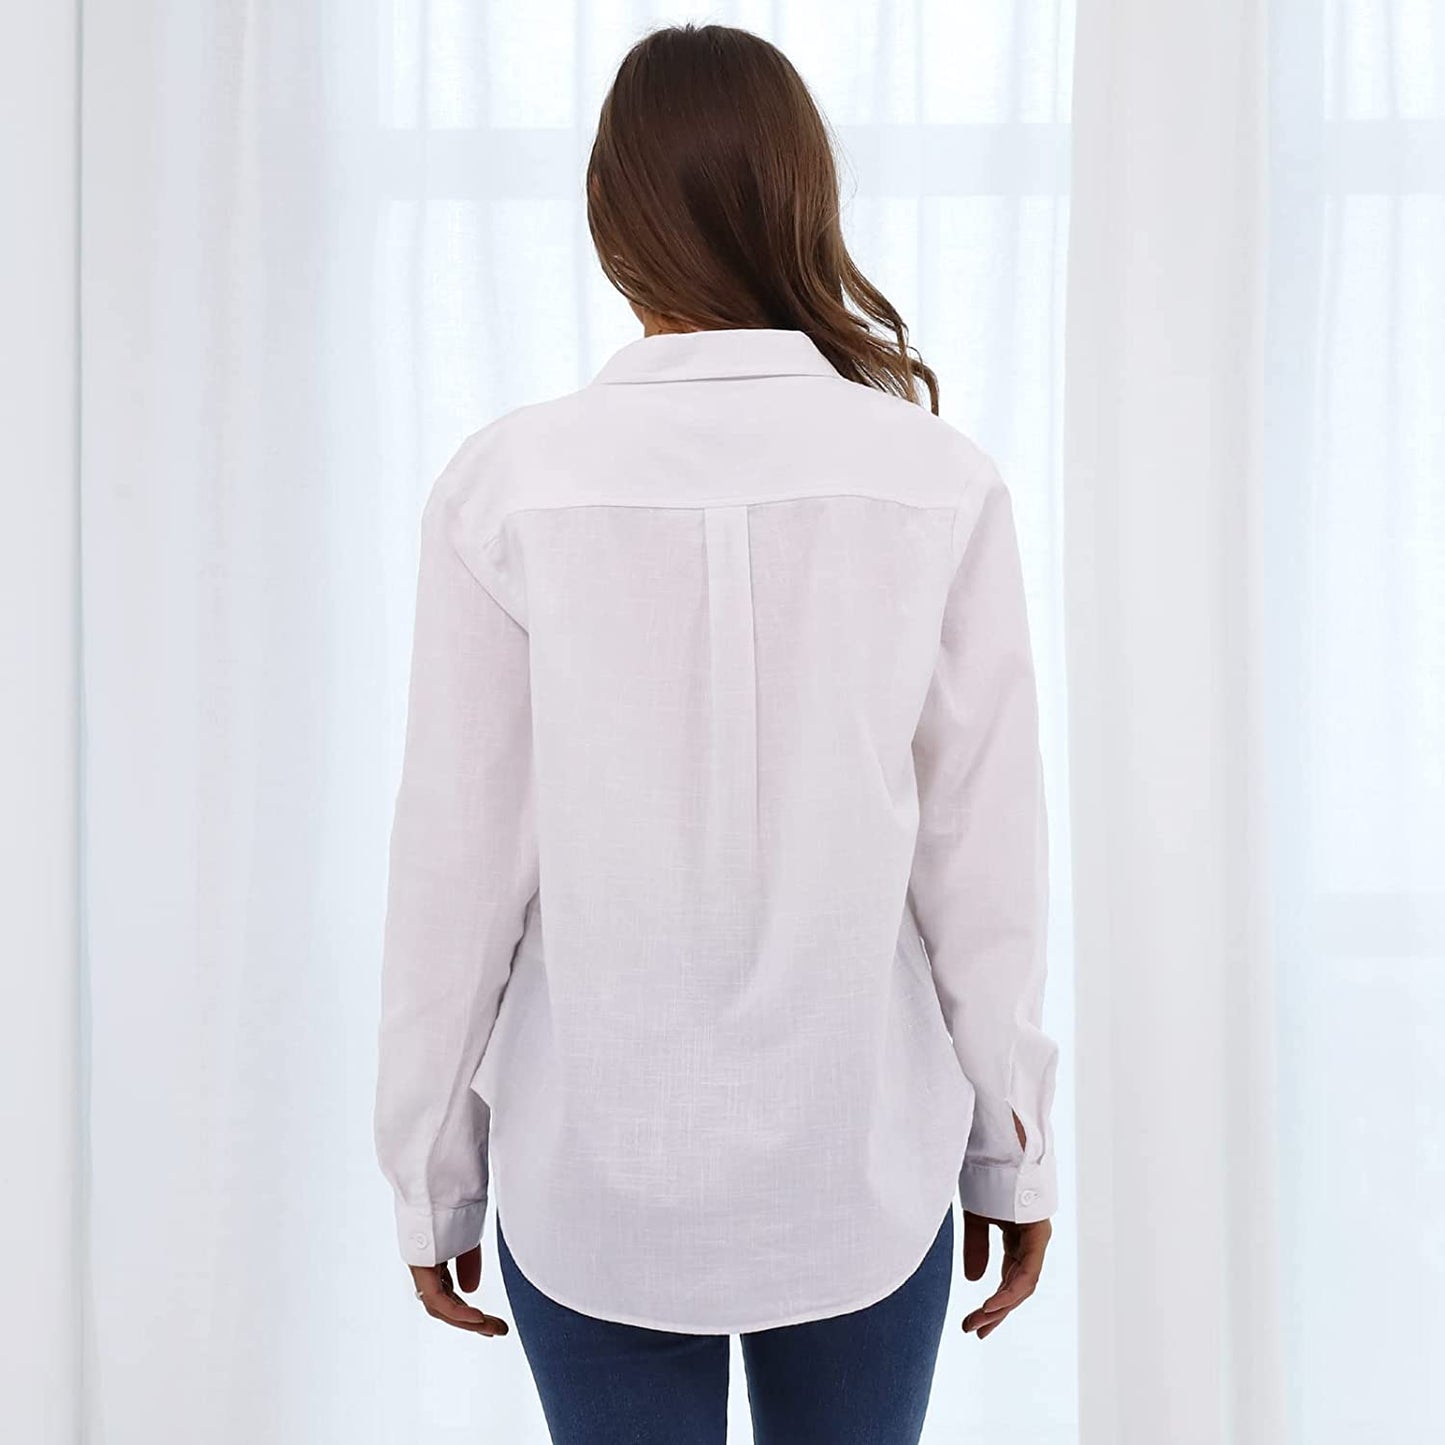 Womens V Neck Button Down Linen Shirts Long Sleeve Blouses Roll Up Casual Work Plain Solid Tops